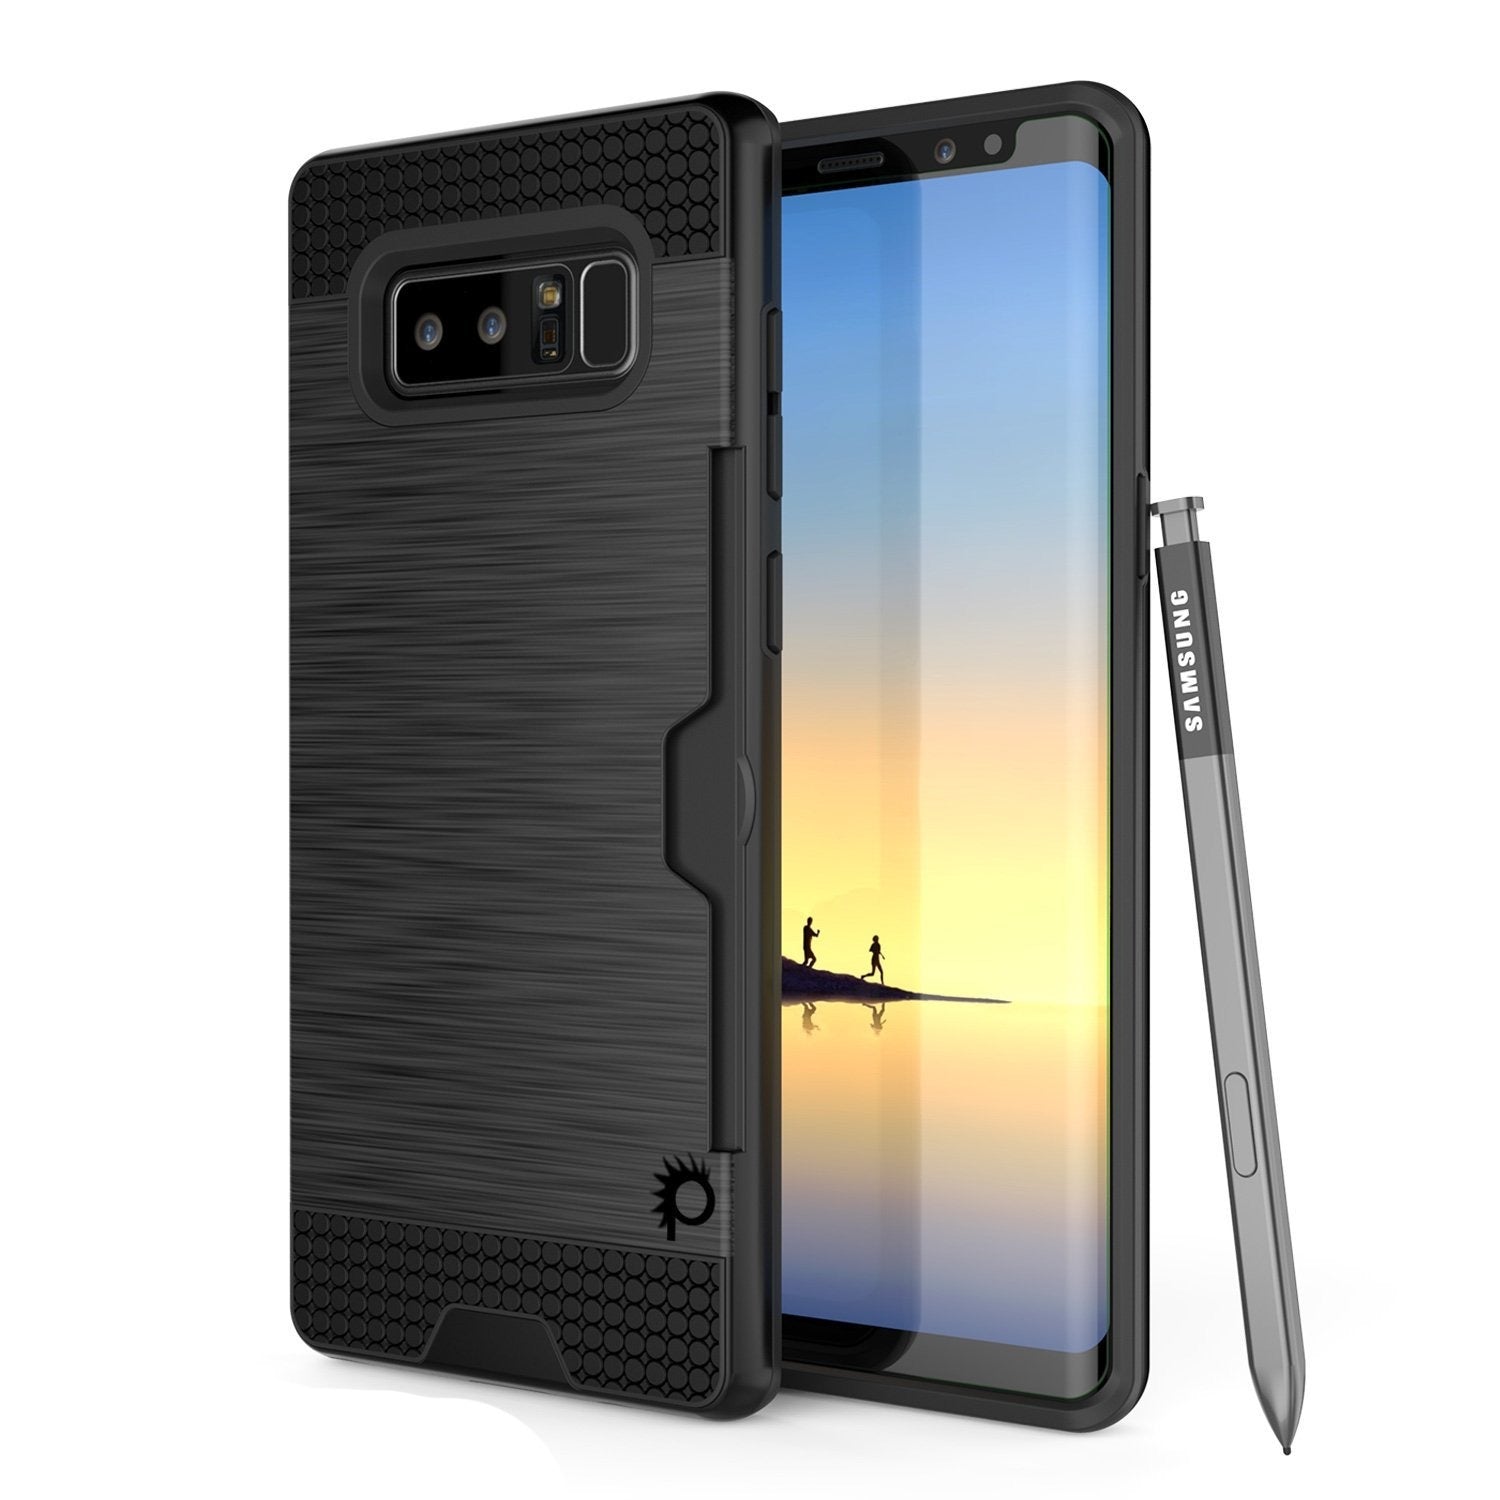 Galaxy Note 8 Case, PUNKcase [SLOT Series] Slim Fit  Samsung Note 8 [Black] (Color in image: Black)